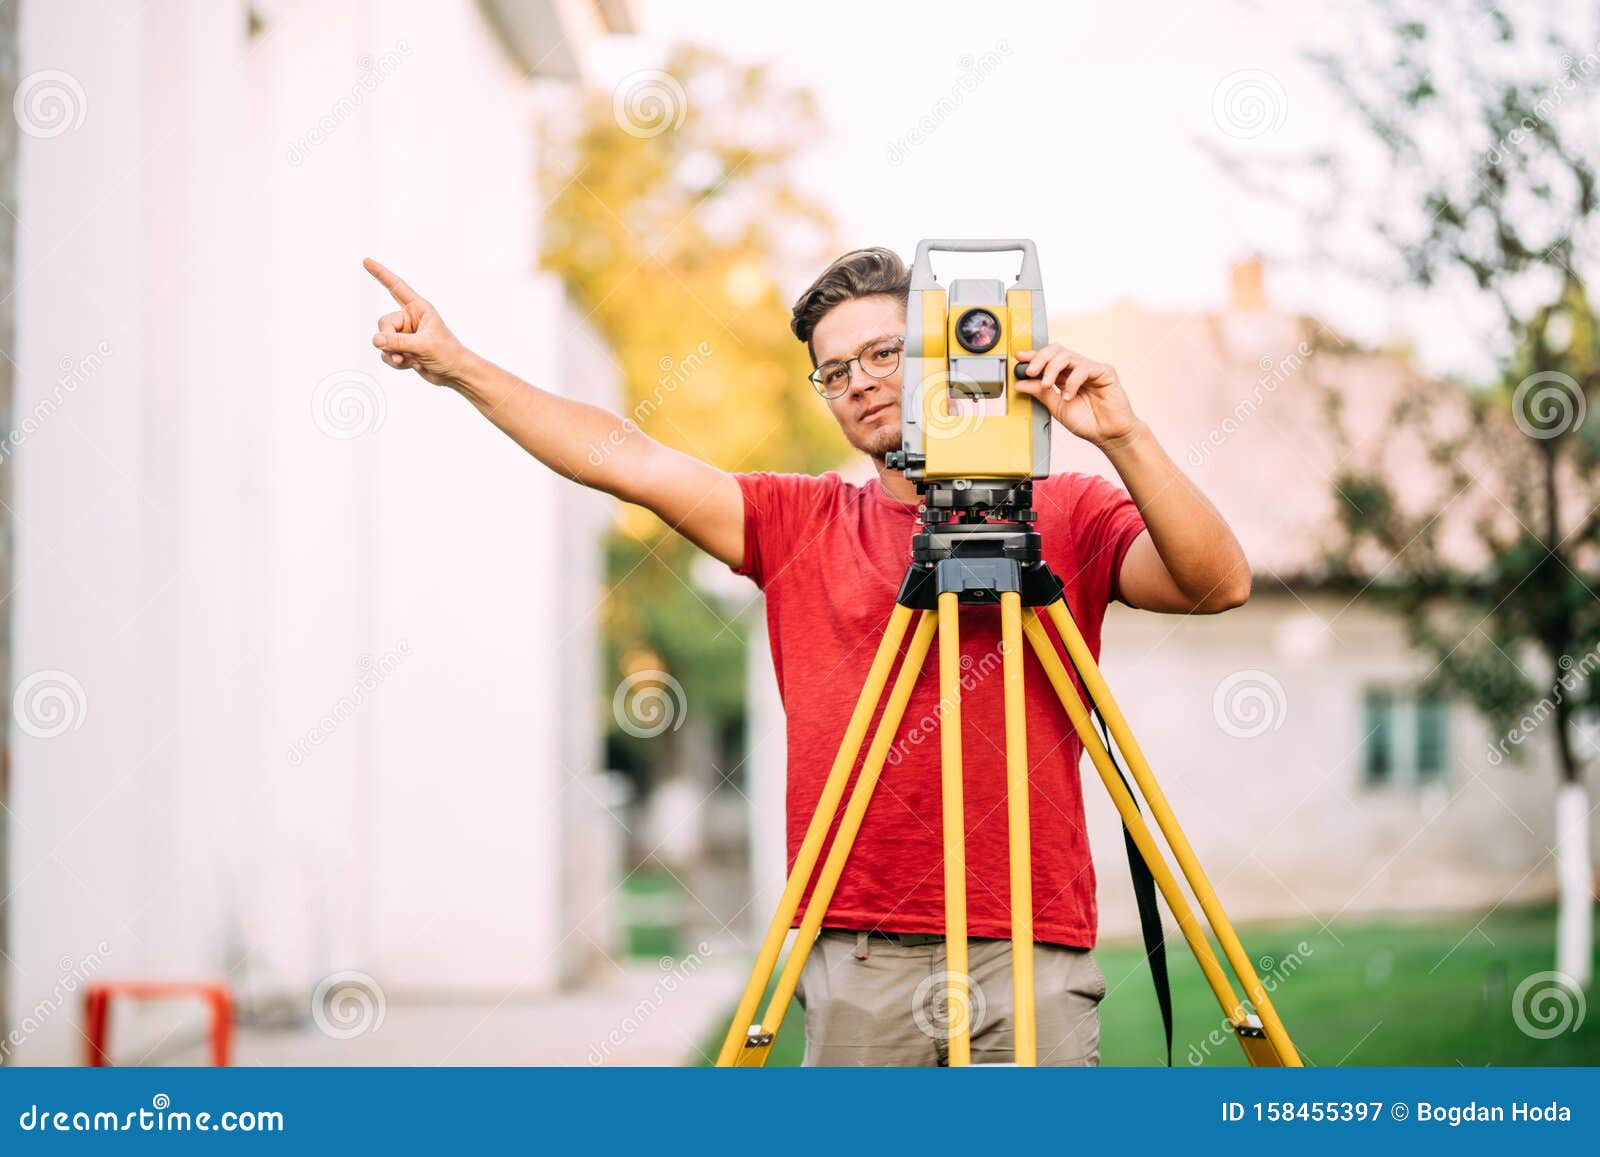 cartographer engineer, surveyor working with total station construction site elevation